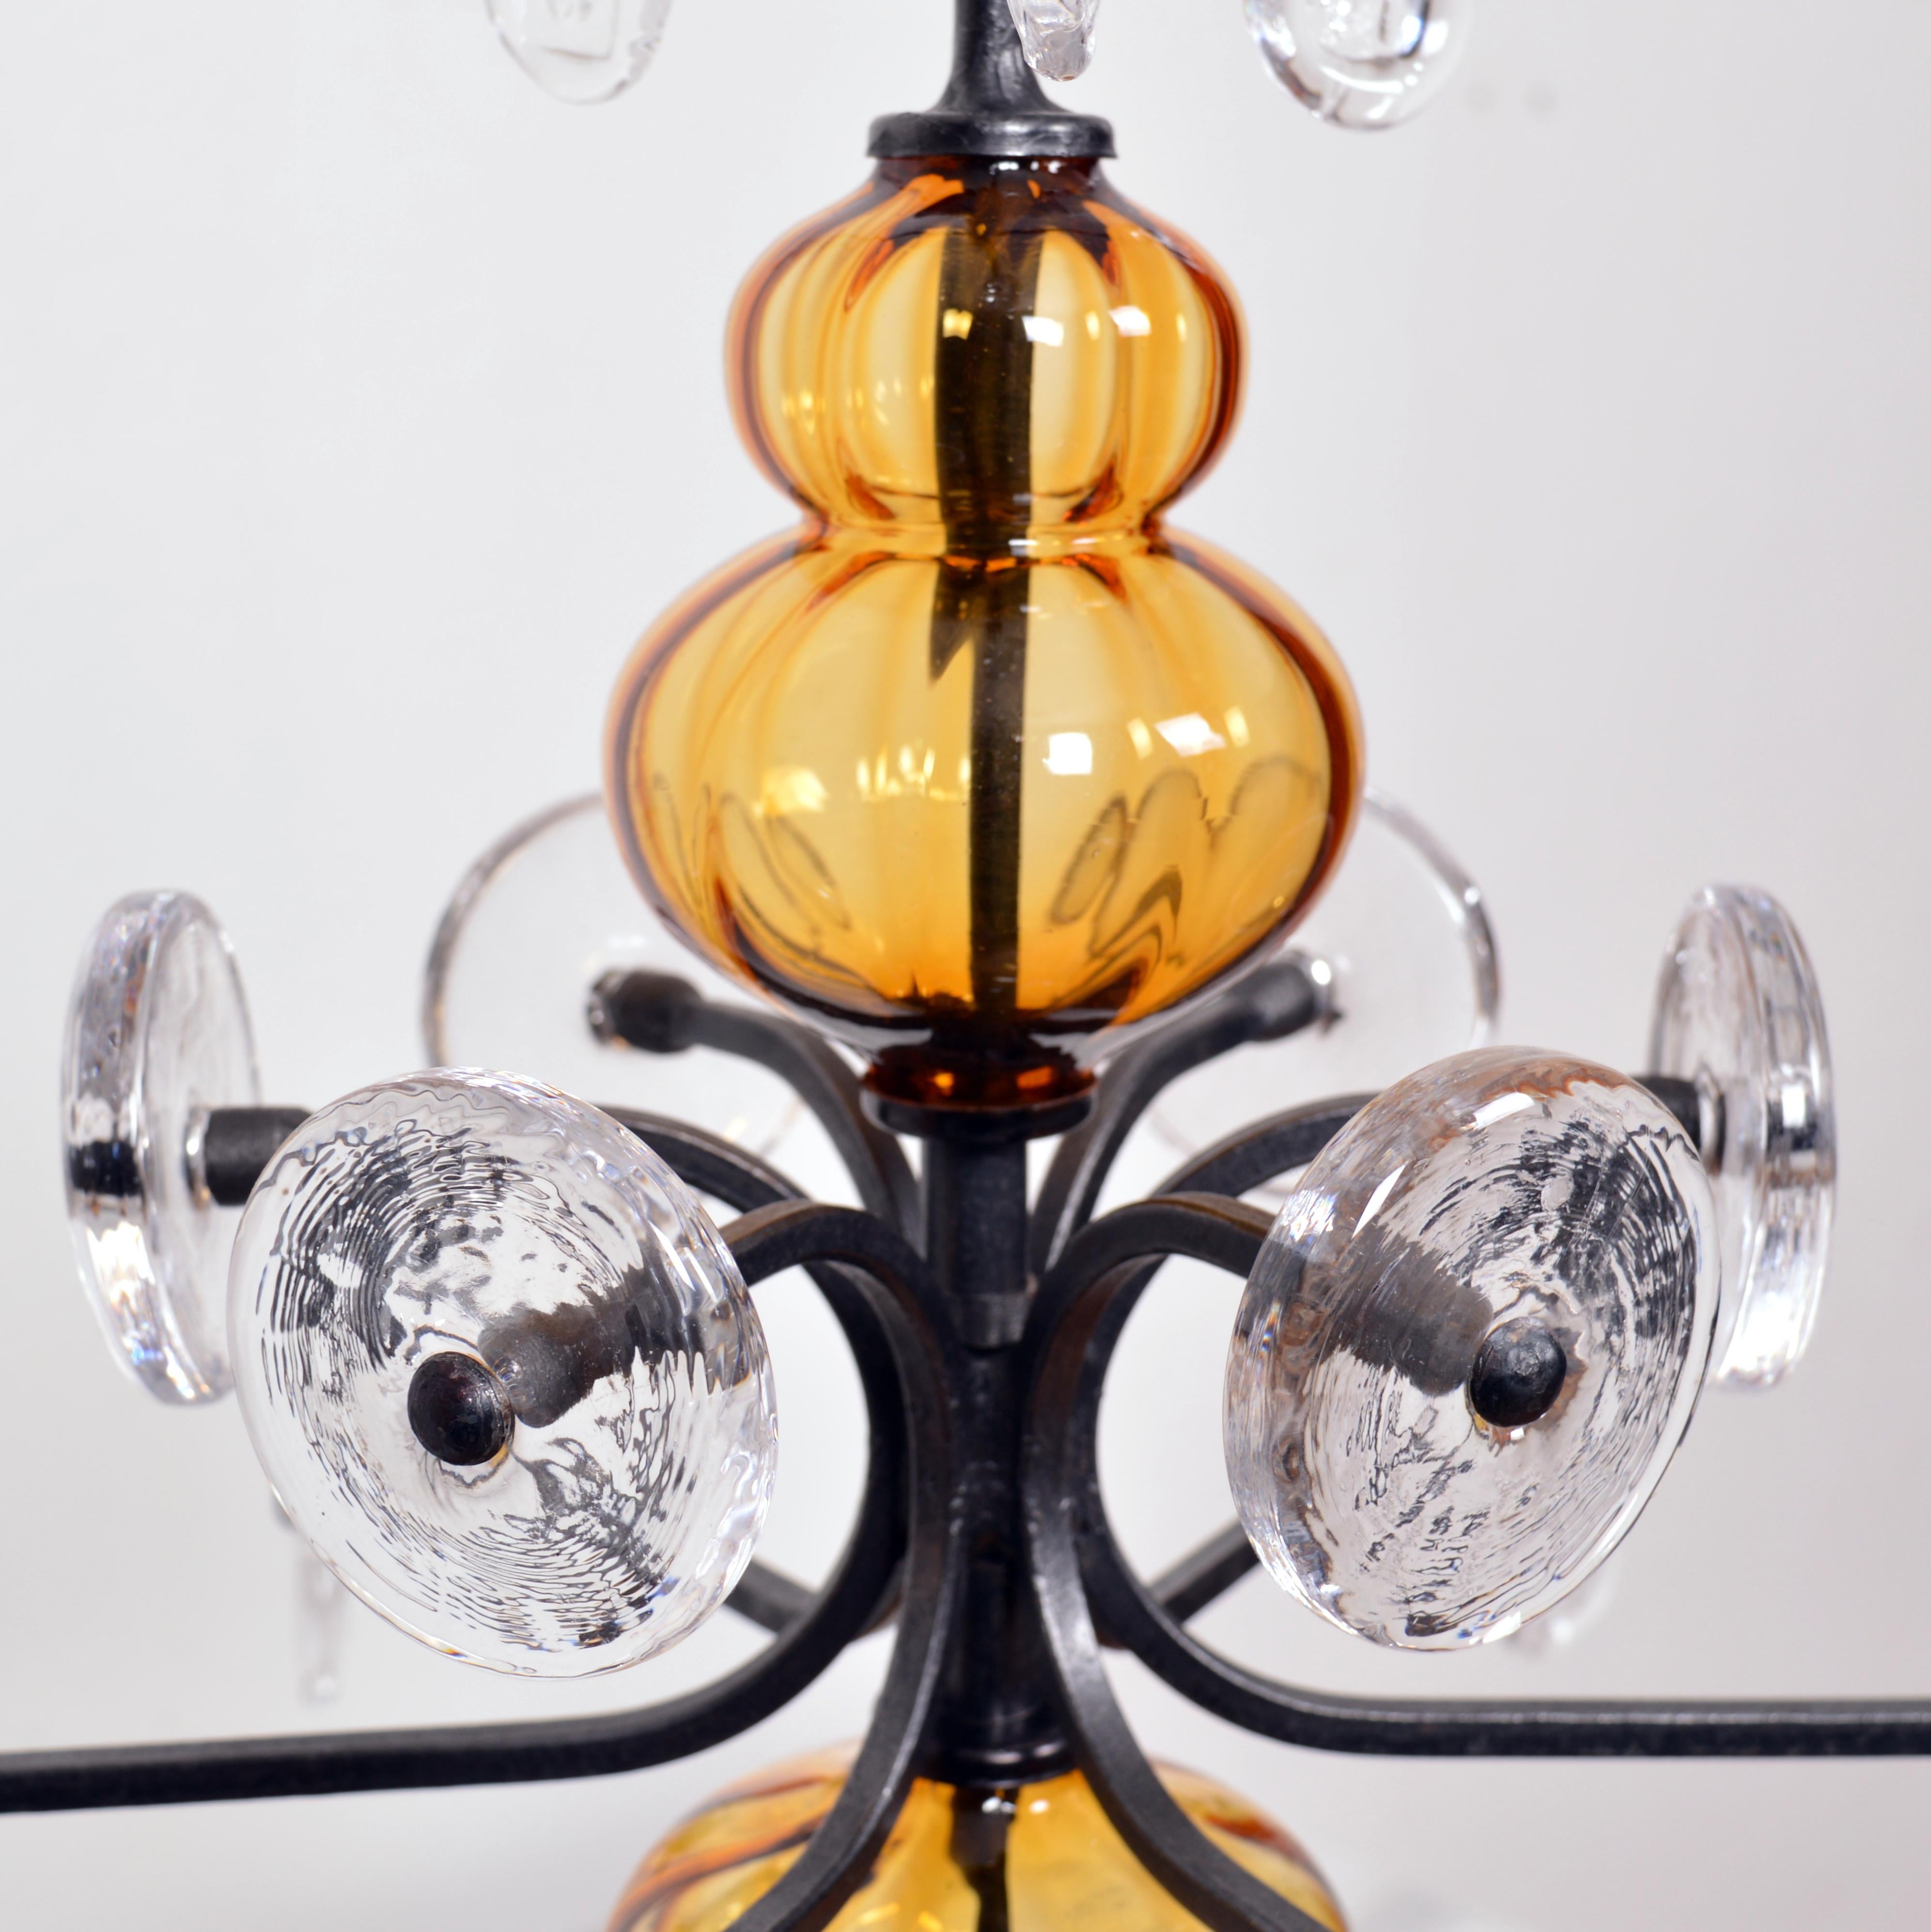 This beautiful amber and clear art glass on wrought iron candelabra chandelier was designed by Erik Höglund for Boda Smide. Erik Höglund (1932–1998) was one of the brightest stars of 20th-century Swedish glass design. This six arm chandelier is in a